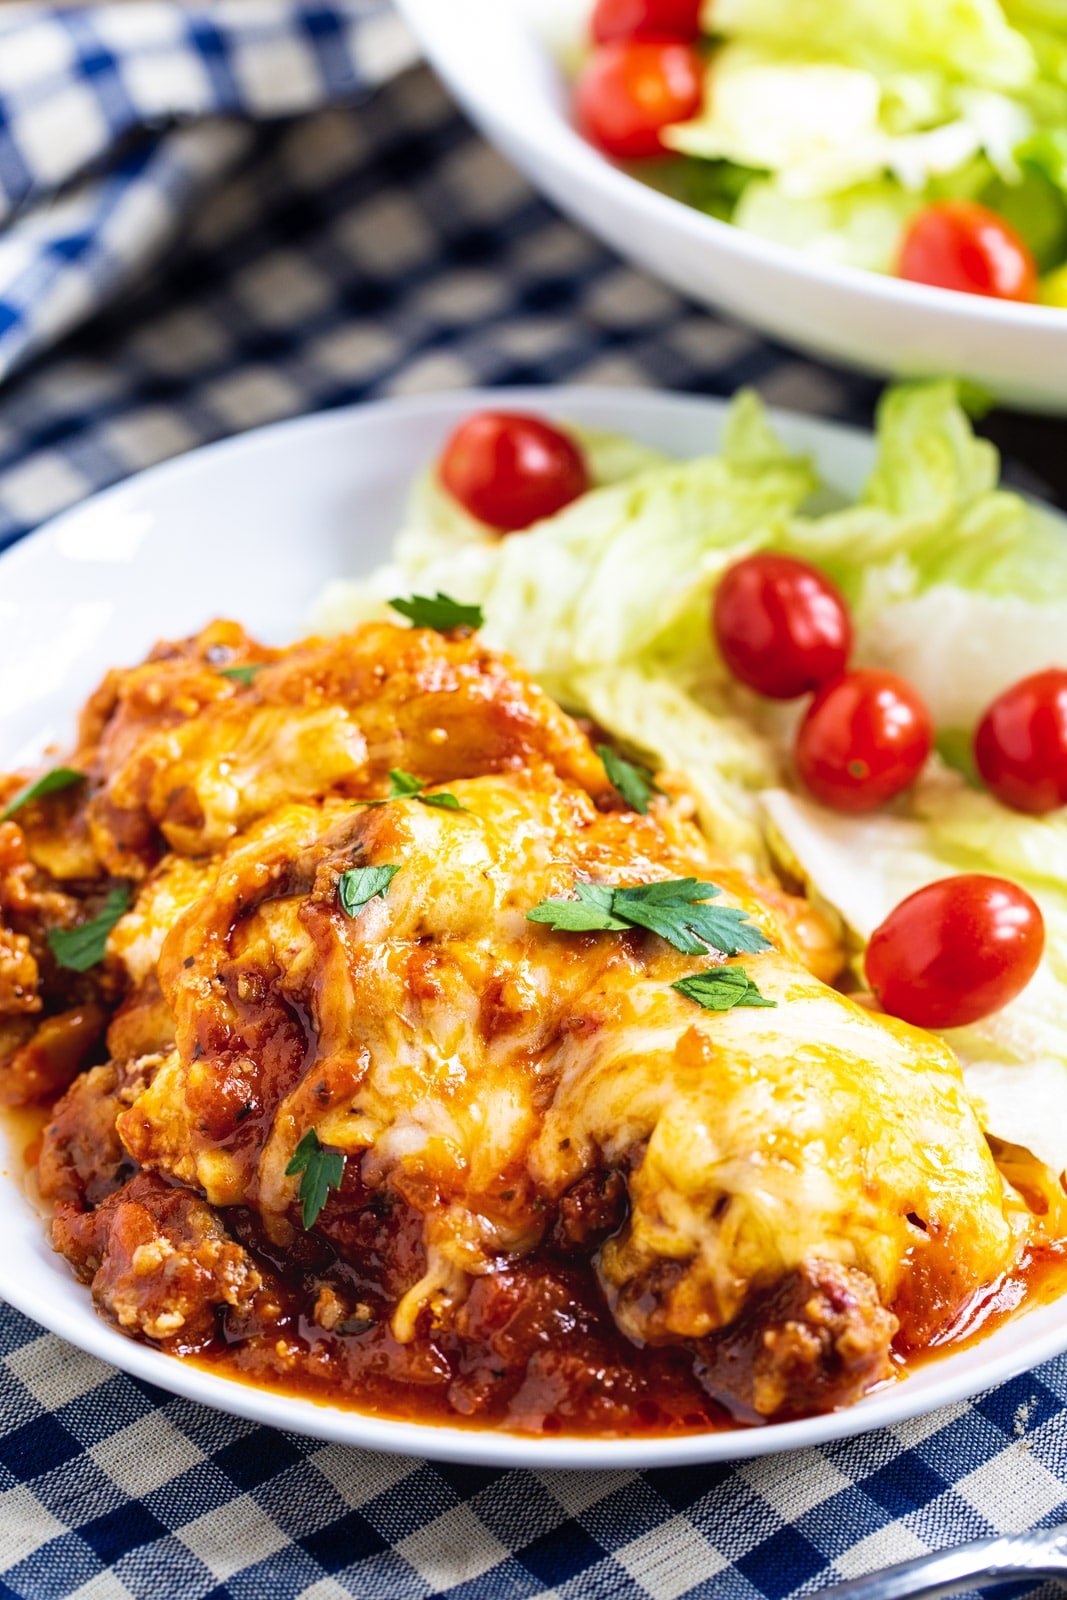 Serving of lasagna on a plate with salad.